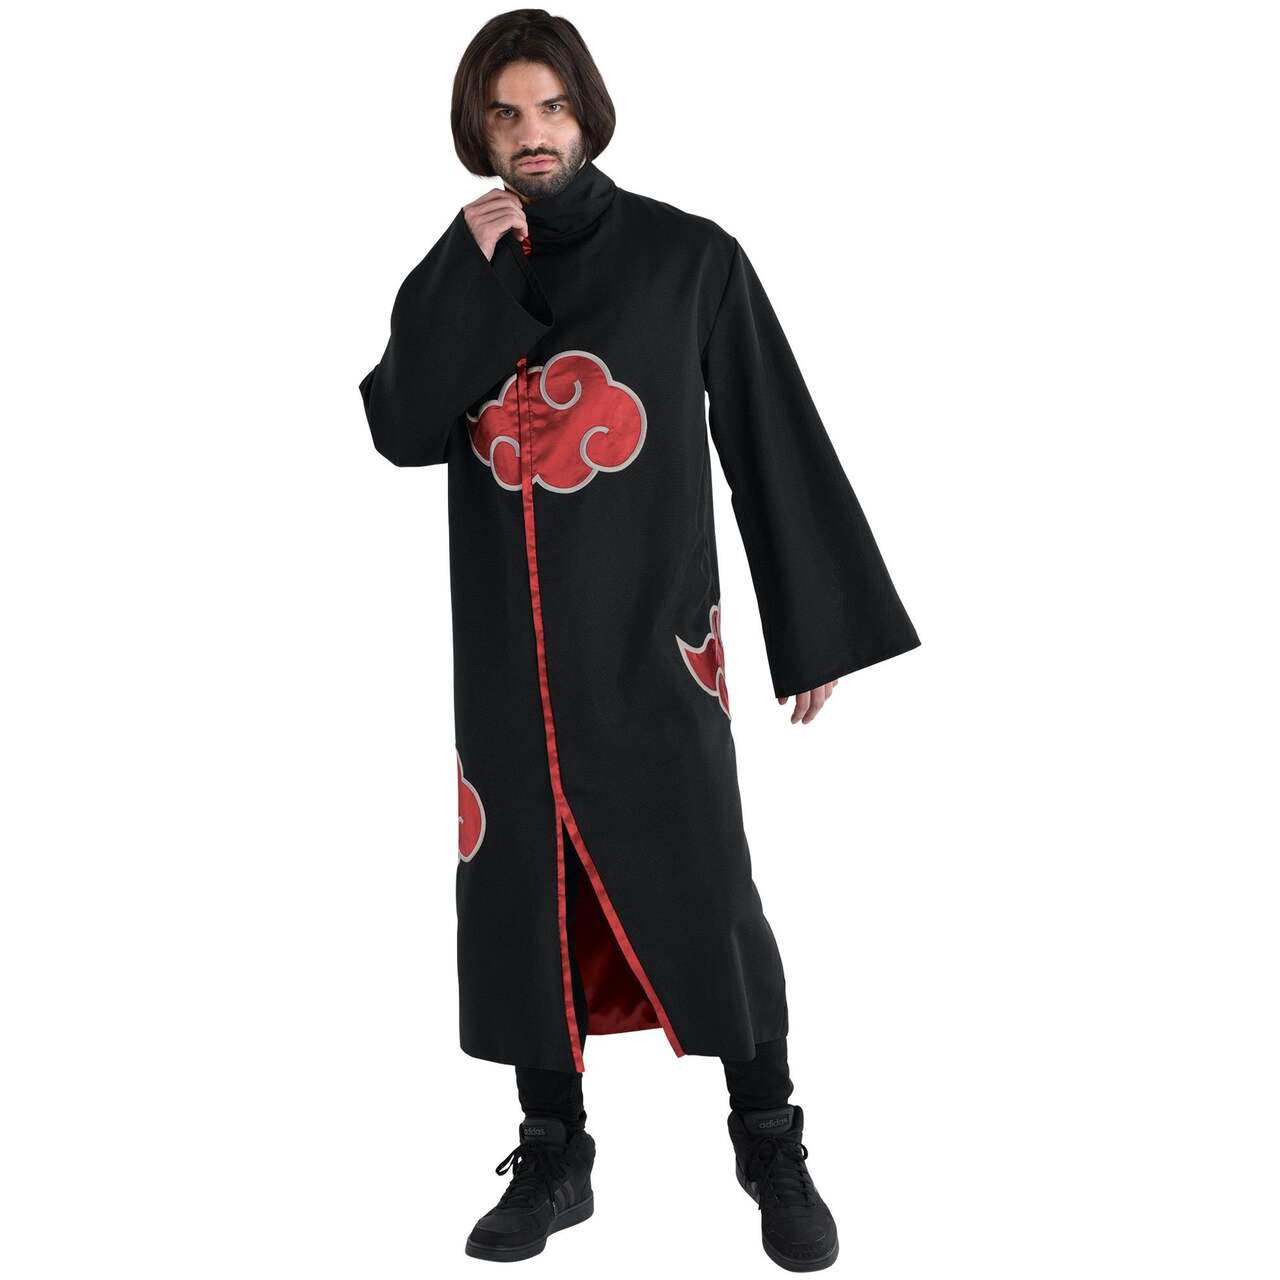 Adult Naruto Akatsuki Robe Anime, Black/Red, One Size, Wearable Costume  Accessory for Halloween